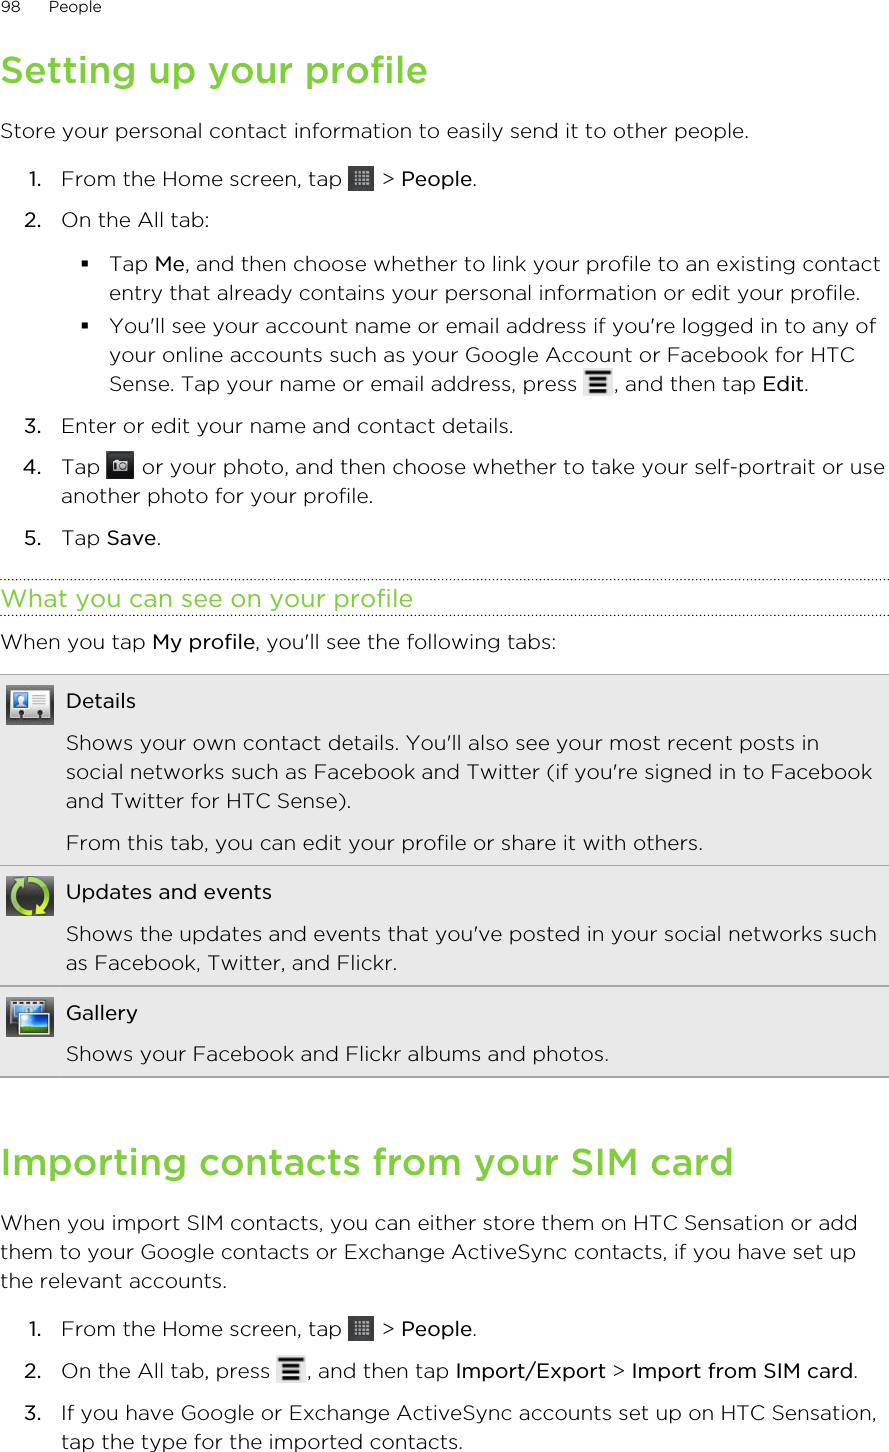 Setting up your profileStore your personal contact information to easily send it to other people.1. From the Home screen, tap   &gt; People.2. On the All tab:§Tap Me, and then choose whether to link your profile to an existing contactentry that already contains your personal information or edit your profile.§You&apos;ll see your account name or email address if you&apos;re logged in to any ofyour online accounts such as your Google Account or Facebook for HTCSense. Tap your name or email address, press  , and then tap Edit.3. Enter or edit your name and contact details.4. Tap   or your photo, and then choose whether to take your self-portrait or useanother photo for your profile.5. Tap Save.What you can see on your profileWhen you tap My profile, you&apos;ll see the following tabs:DetailsShows your own contact details. You&apos;ll also see your most recent posts insocial networks such as Facebook and Twitter (if you&apos;re signed in to Facebookand Twitter for HTC Sense).From this tab, you can edit your profile or share it with others.Updates and eventsShows the updates and events that you&apos;ve posted in your social networks suchas Facebook, Twitter, and Flickr.GalleryShows your Facebook and Flickr albums and photos.Importing contacts from your SIM cardWhen you import SIM contacts, you can either store them on HTC Sensation or addthem to your Google contacts or Exchange ActiveSync contacts, if you have set upthe relevant accounts.1. From the Home screen, tap   &gt; People.2. On the All tab, press  , and then tap Import/Export &gt; Import from SIM card.3. If you have Google or Exchange ActiveSync accounts set up on HTC Sensation,tap the type for the imported contacts.98 People